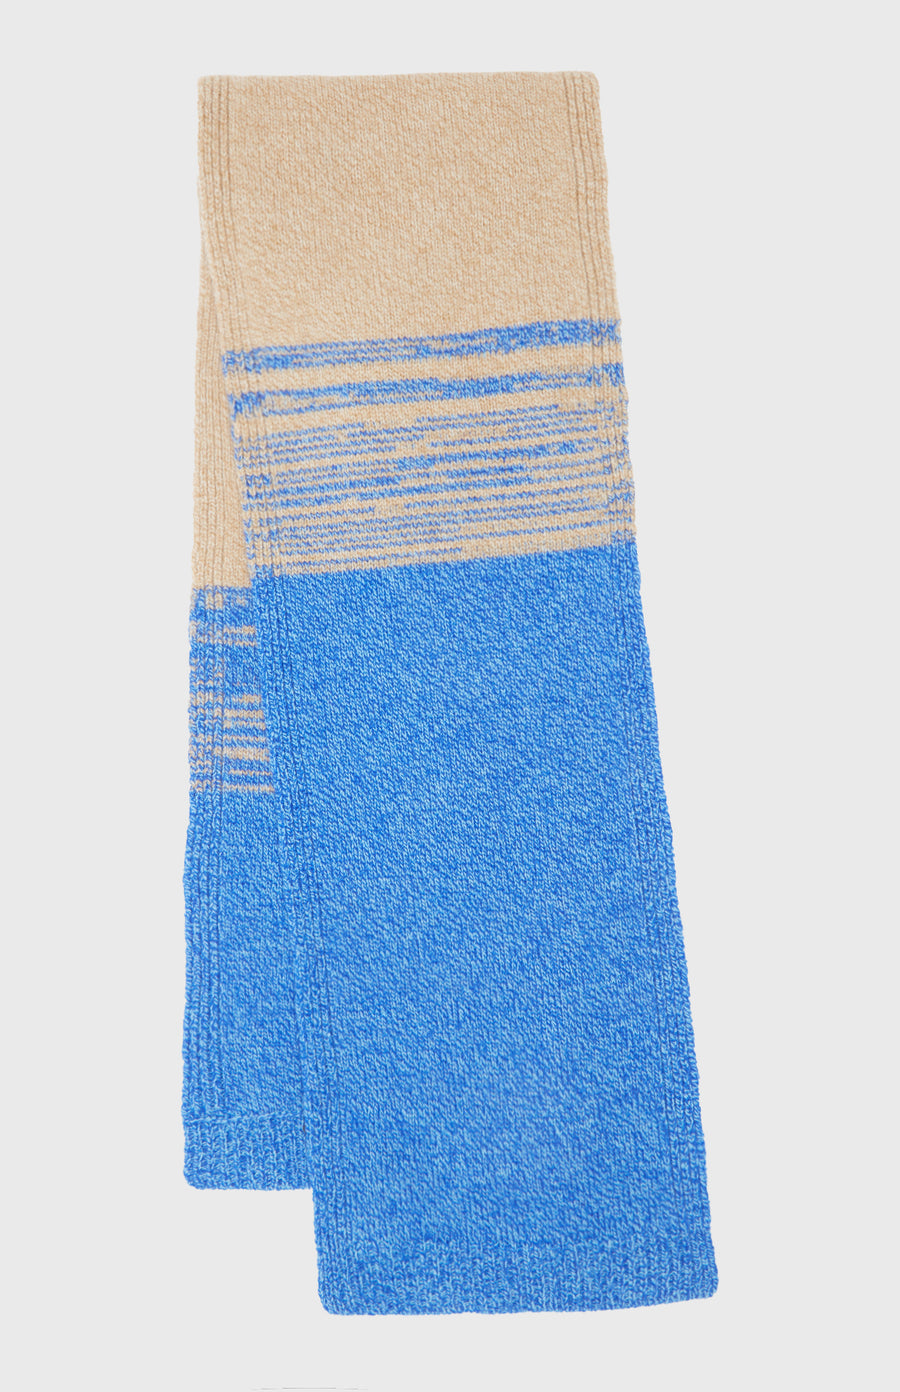 Men's Lambswool Scarf in Camel and Cobalt - Pringle of Scotland